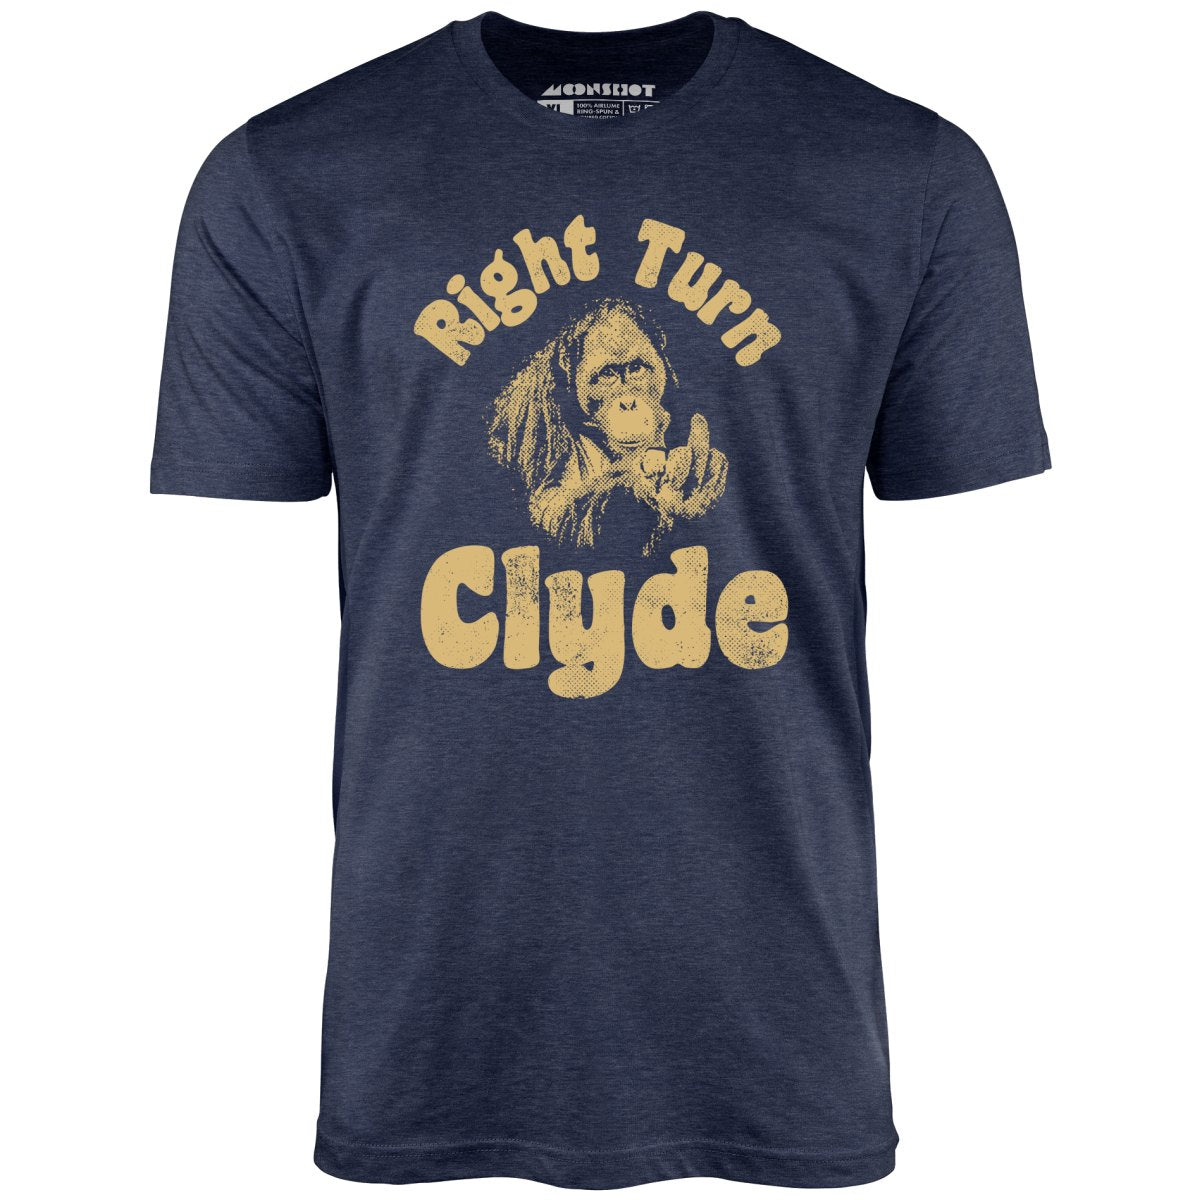 Right Turn Clyde - Unisex T-Shirt